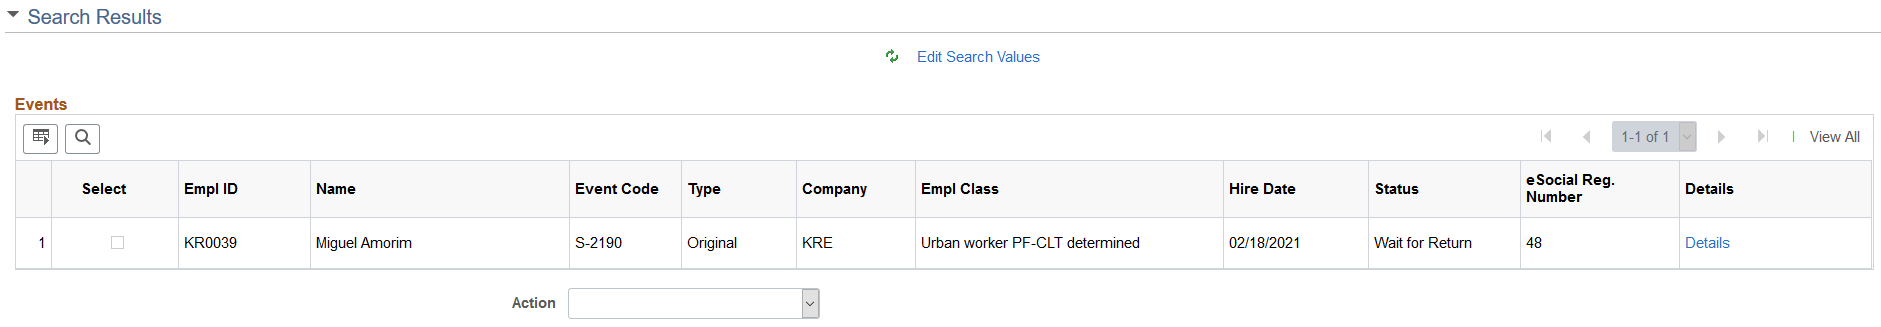 eSocial Pre-Hiring Monitor page showing search results